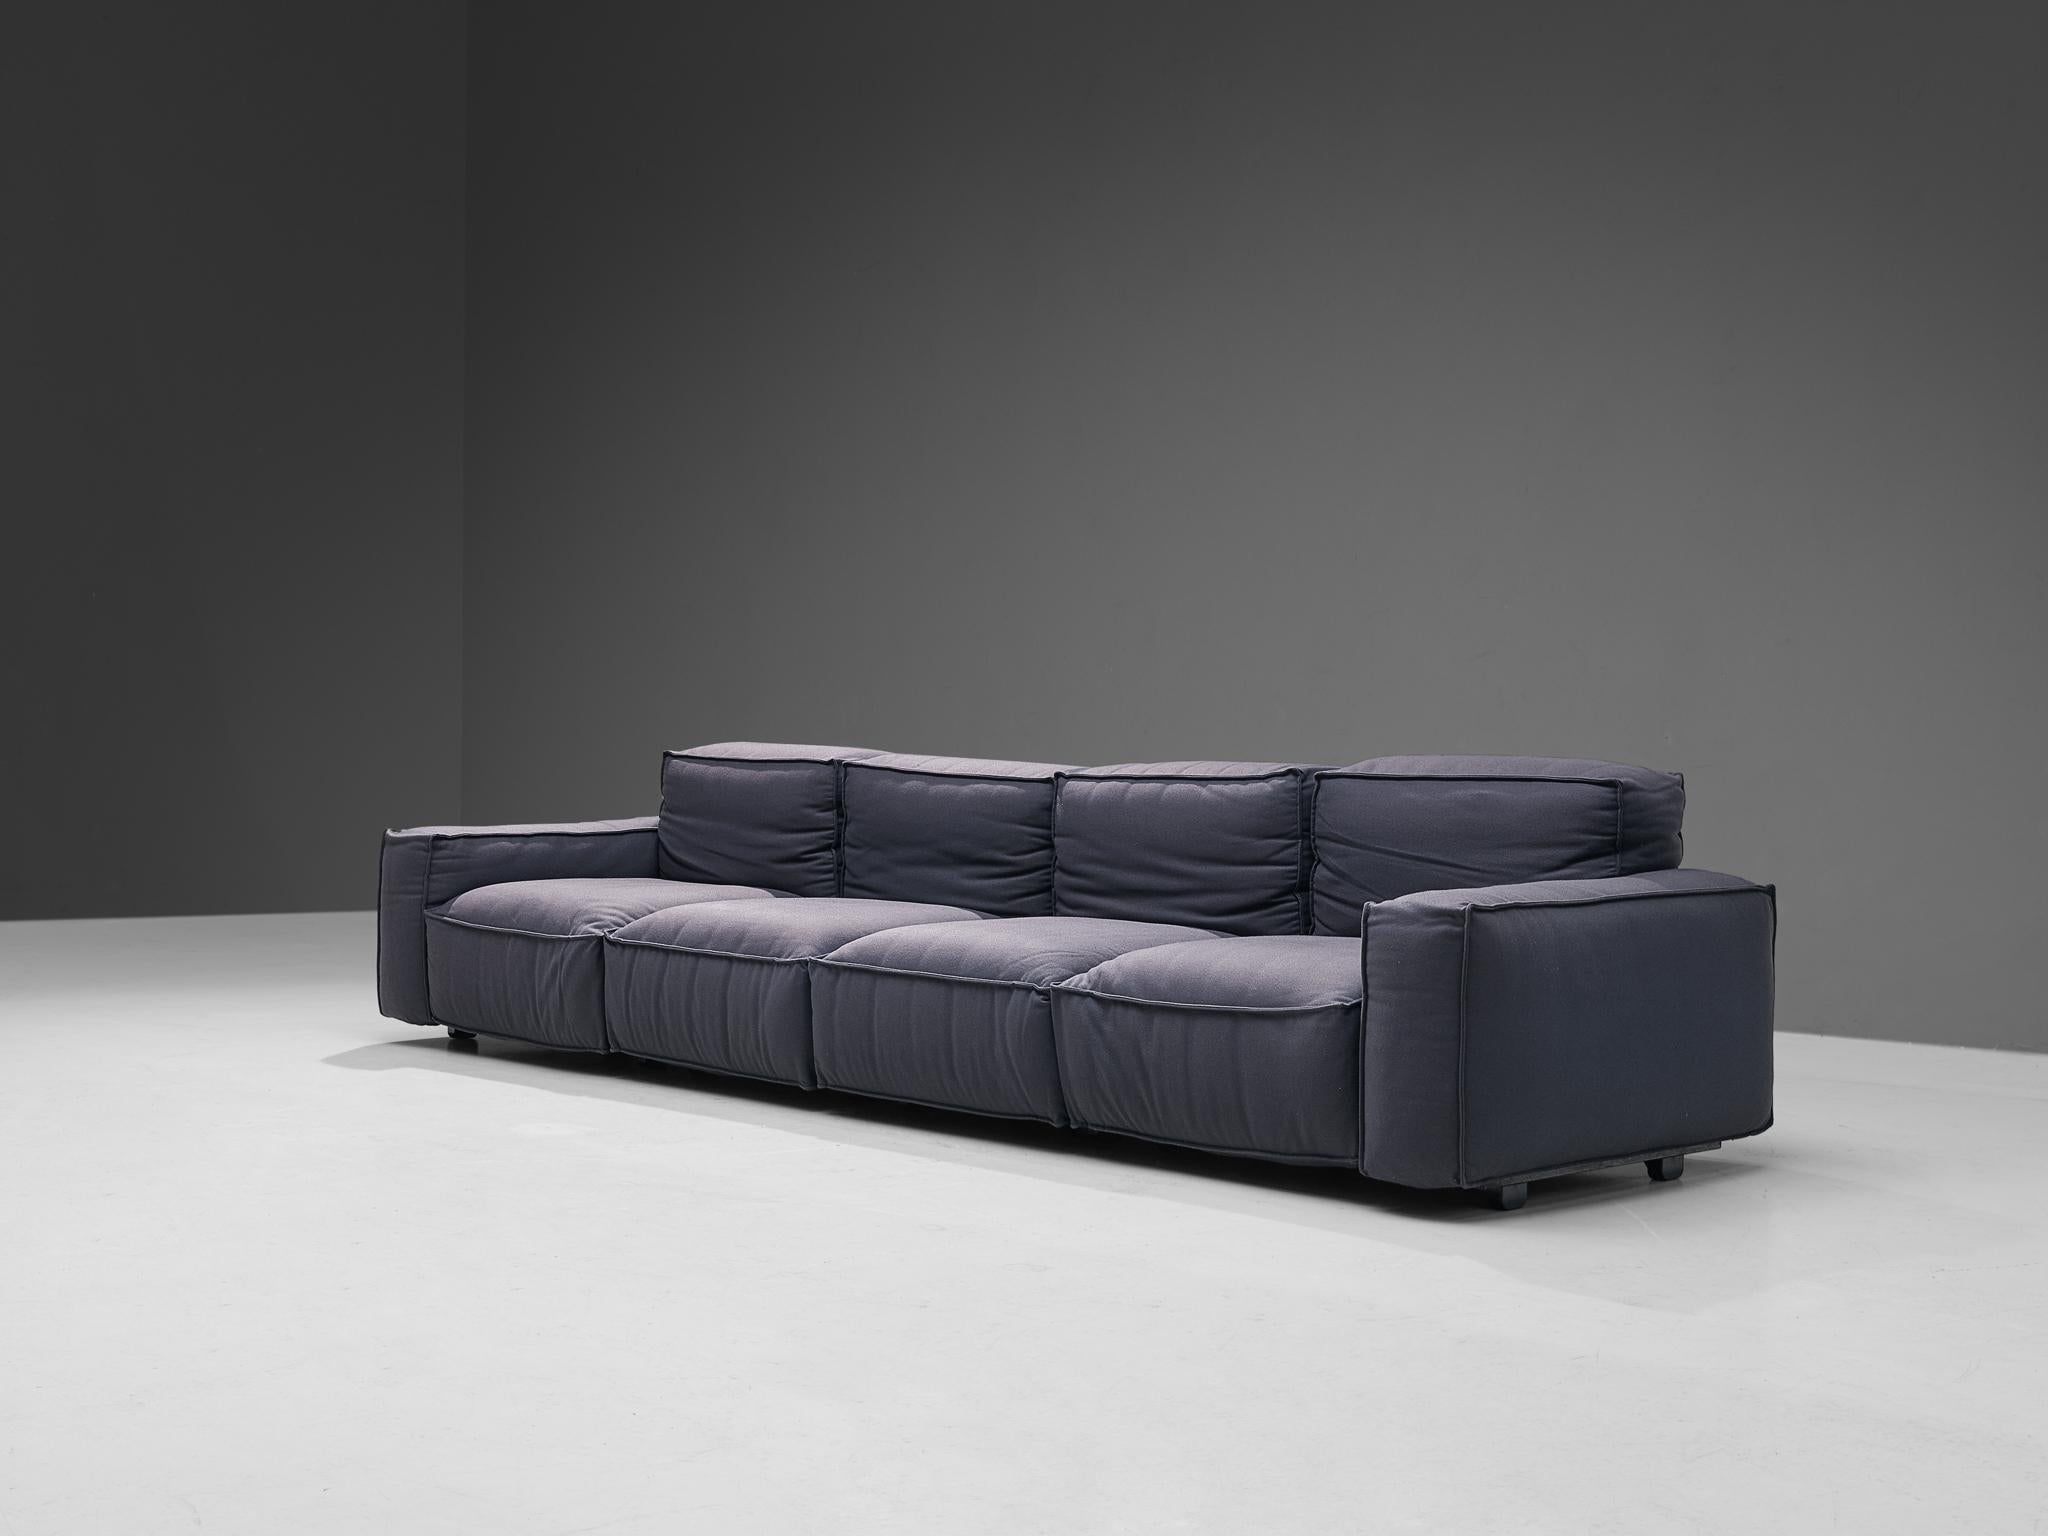 Mario Marenco for Arflex Four-Seater Sofa in Blue Woolen Upholstery